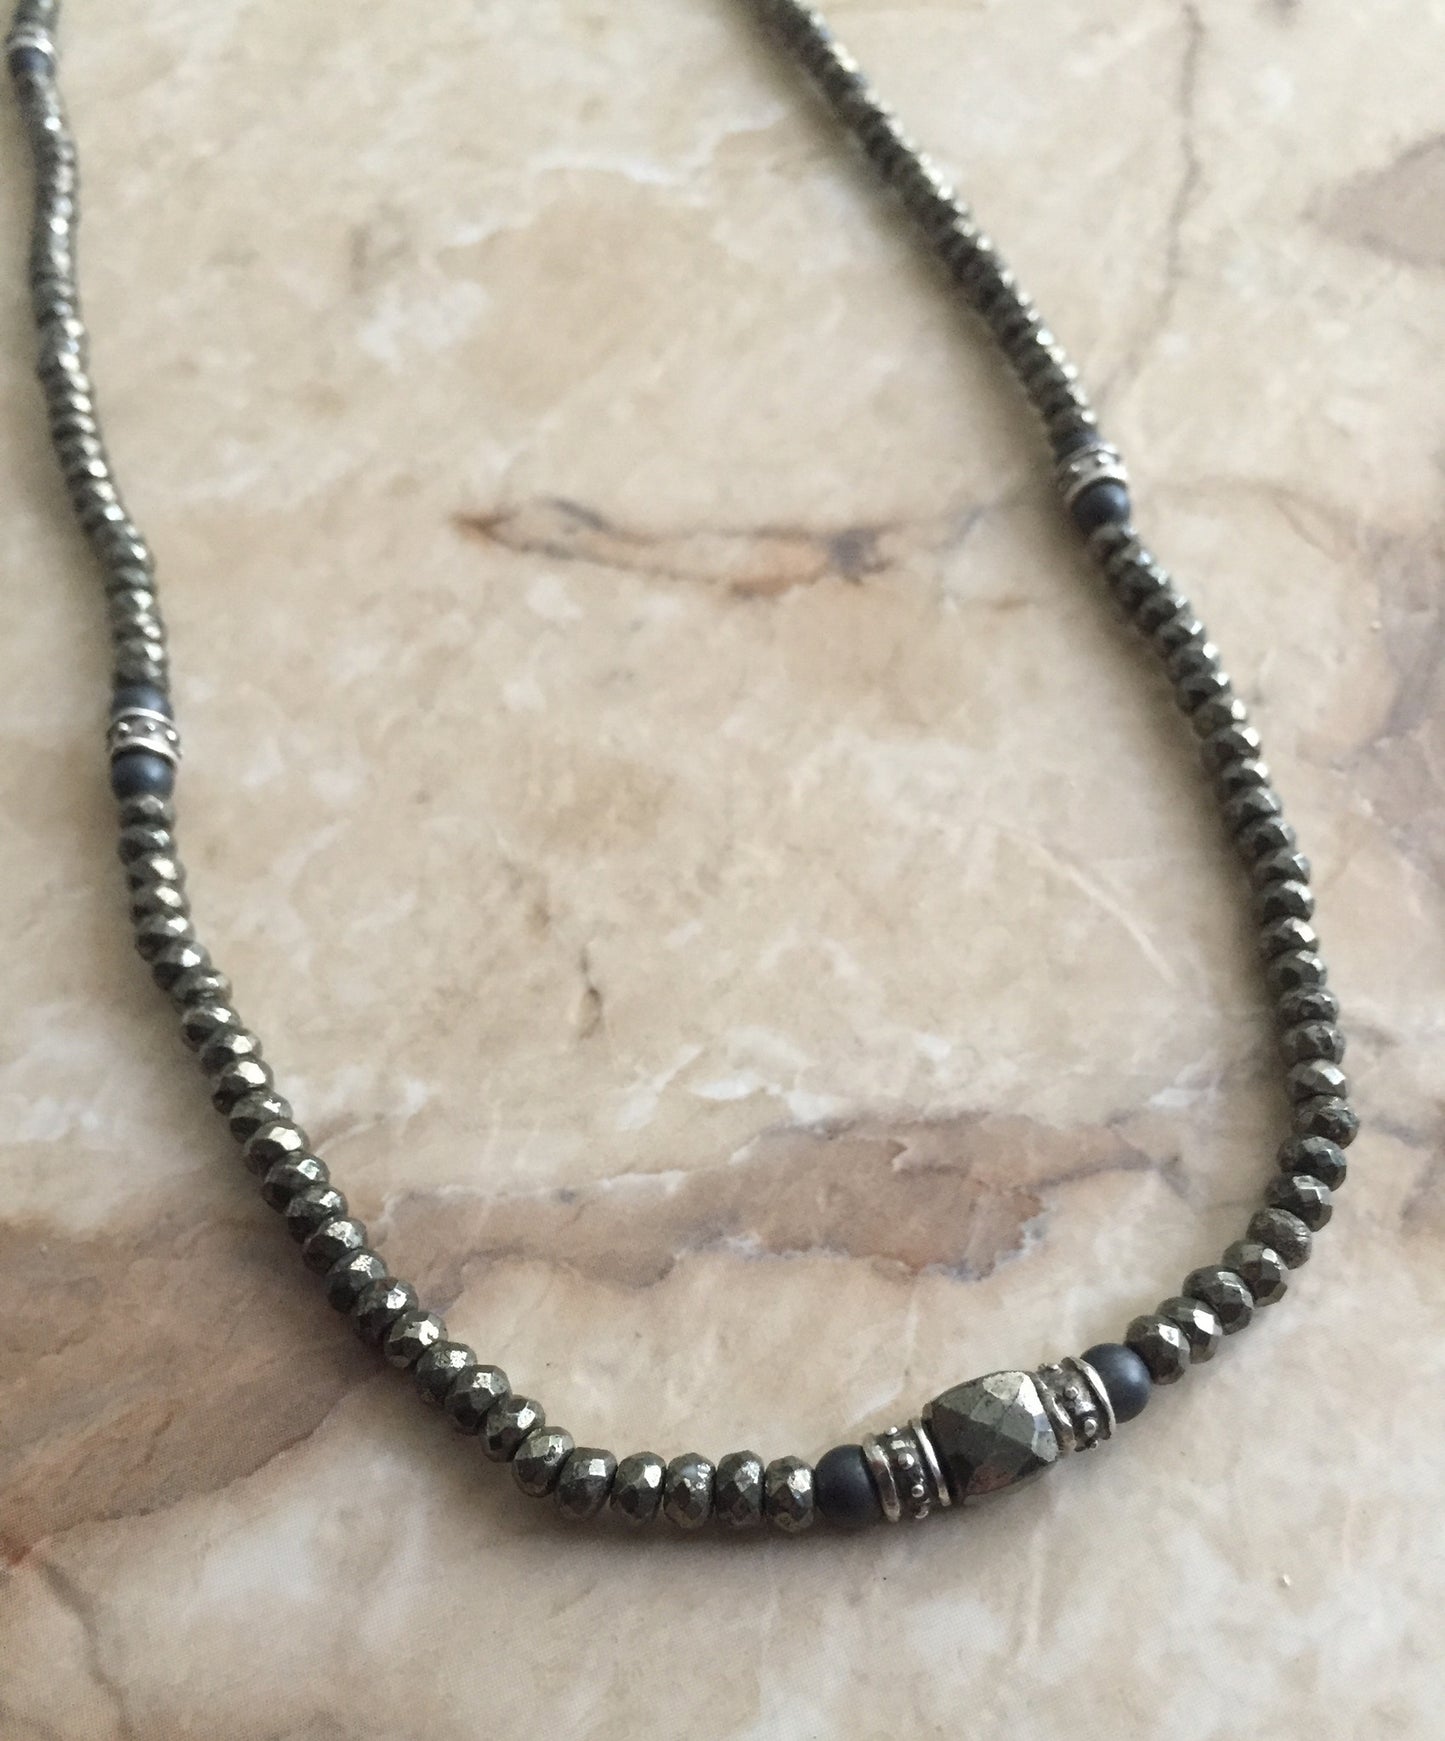 Pyrite Necklace & Silver Roundels by Roman paul